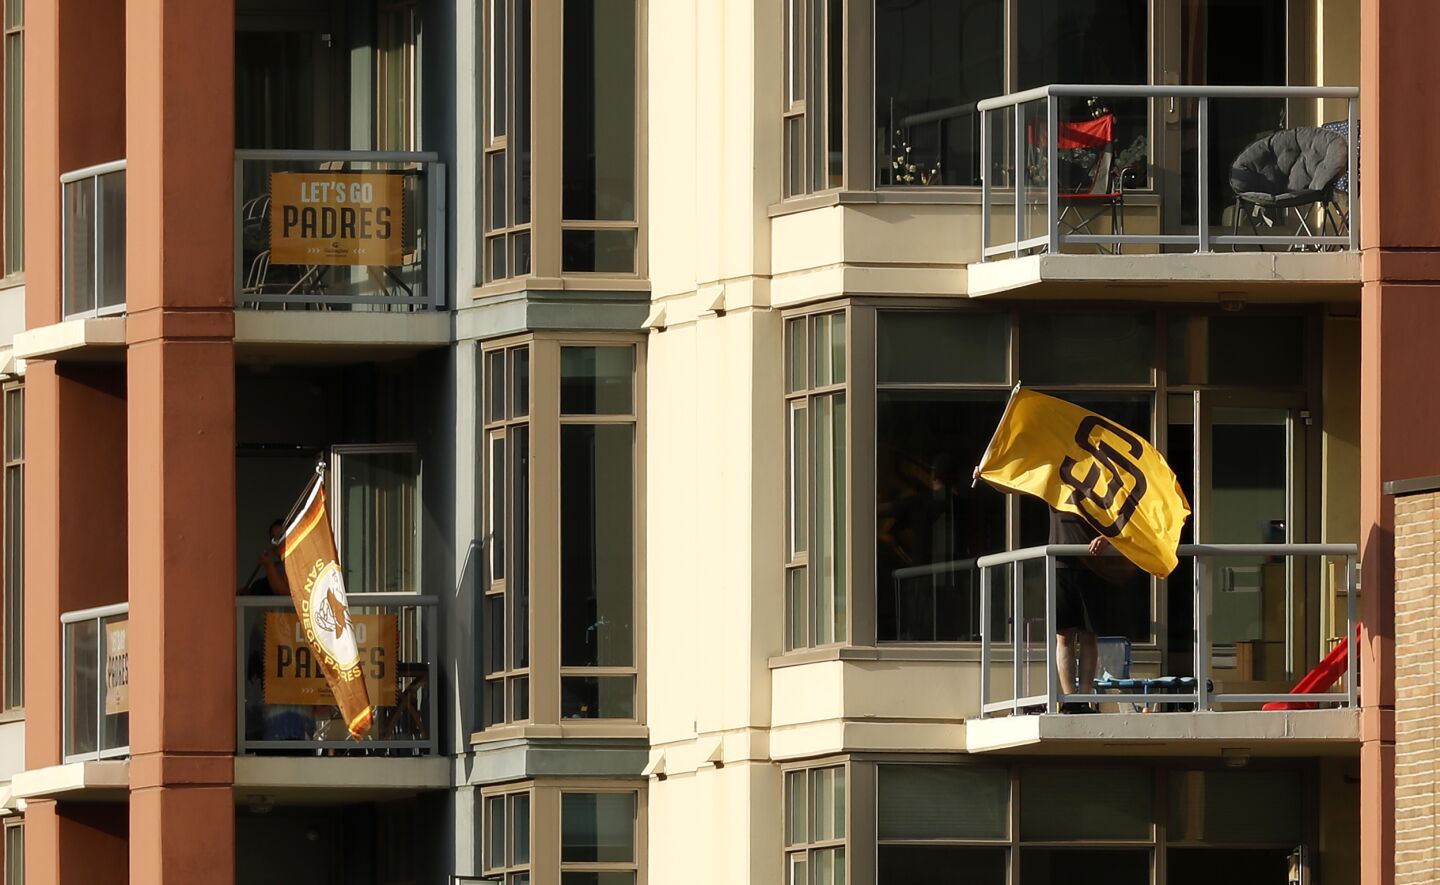 Fans wave flags in nearby buildings as the San Diego Padres play the Colorado Rockies at Petco Park on Wednesday, Sept. 9, 2020.